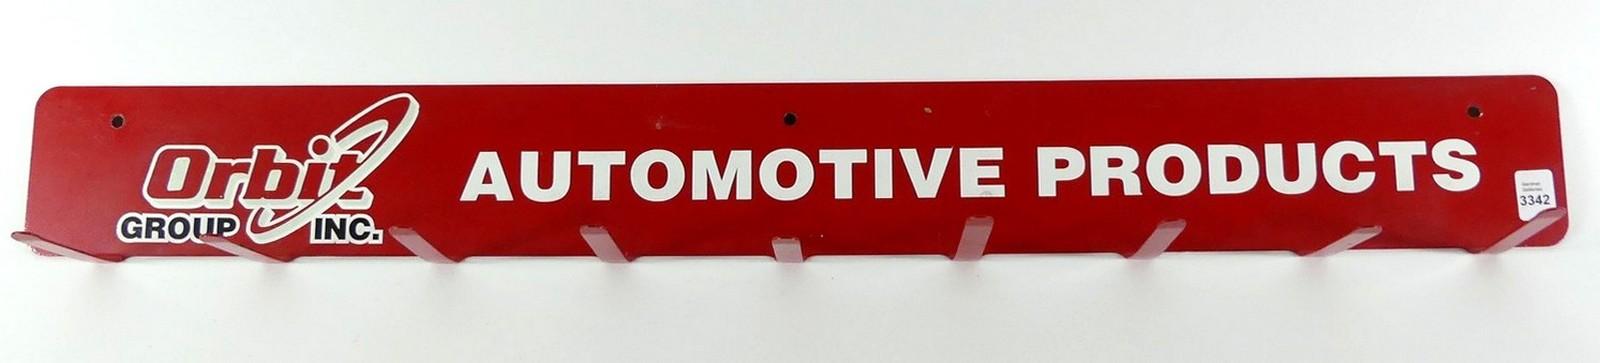 AUTOMOTIVE PRODUCTS HOLDER